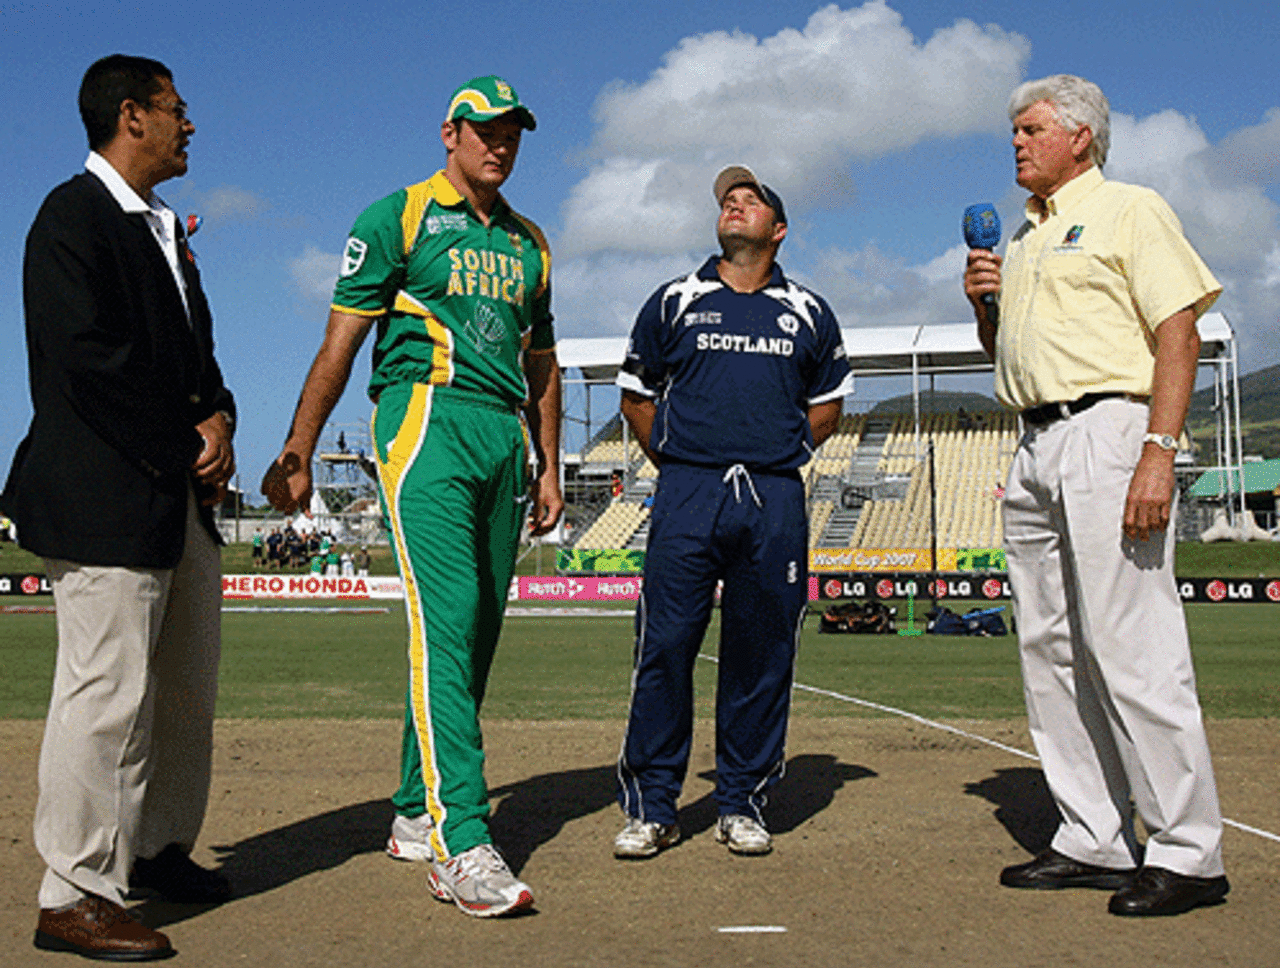 Graeme Smith and Ryan Watson at the toss along with Ranjan Madugalle and Barry Richards, Scotland v South Africa, Group A, St Kitts, March 20, 2007